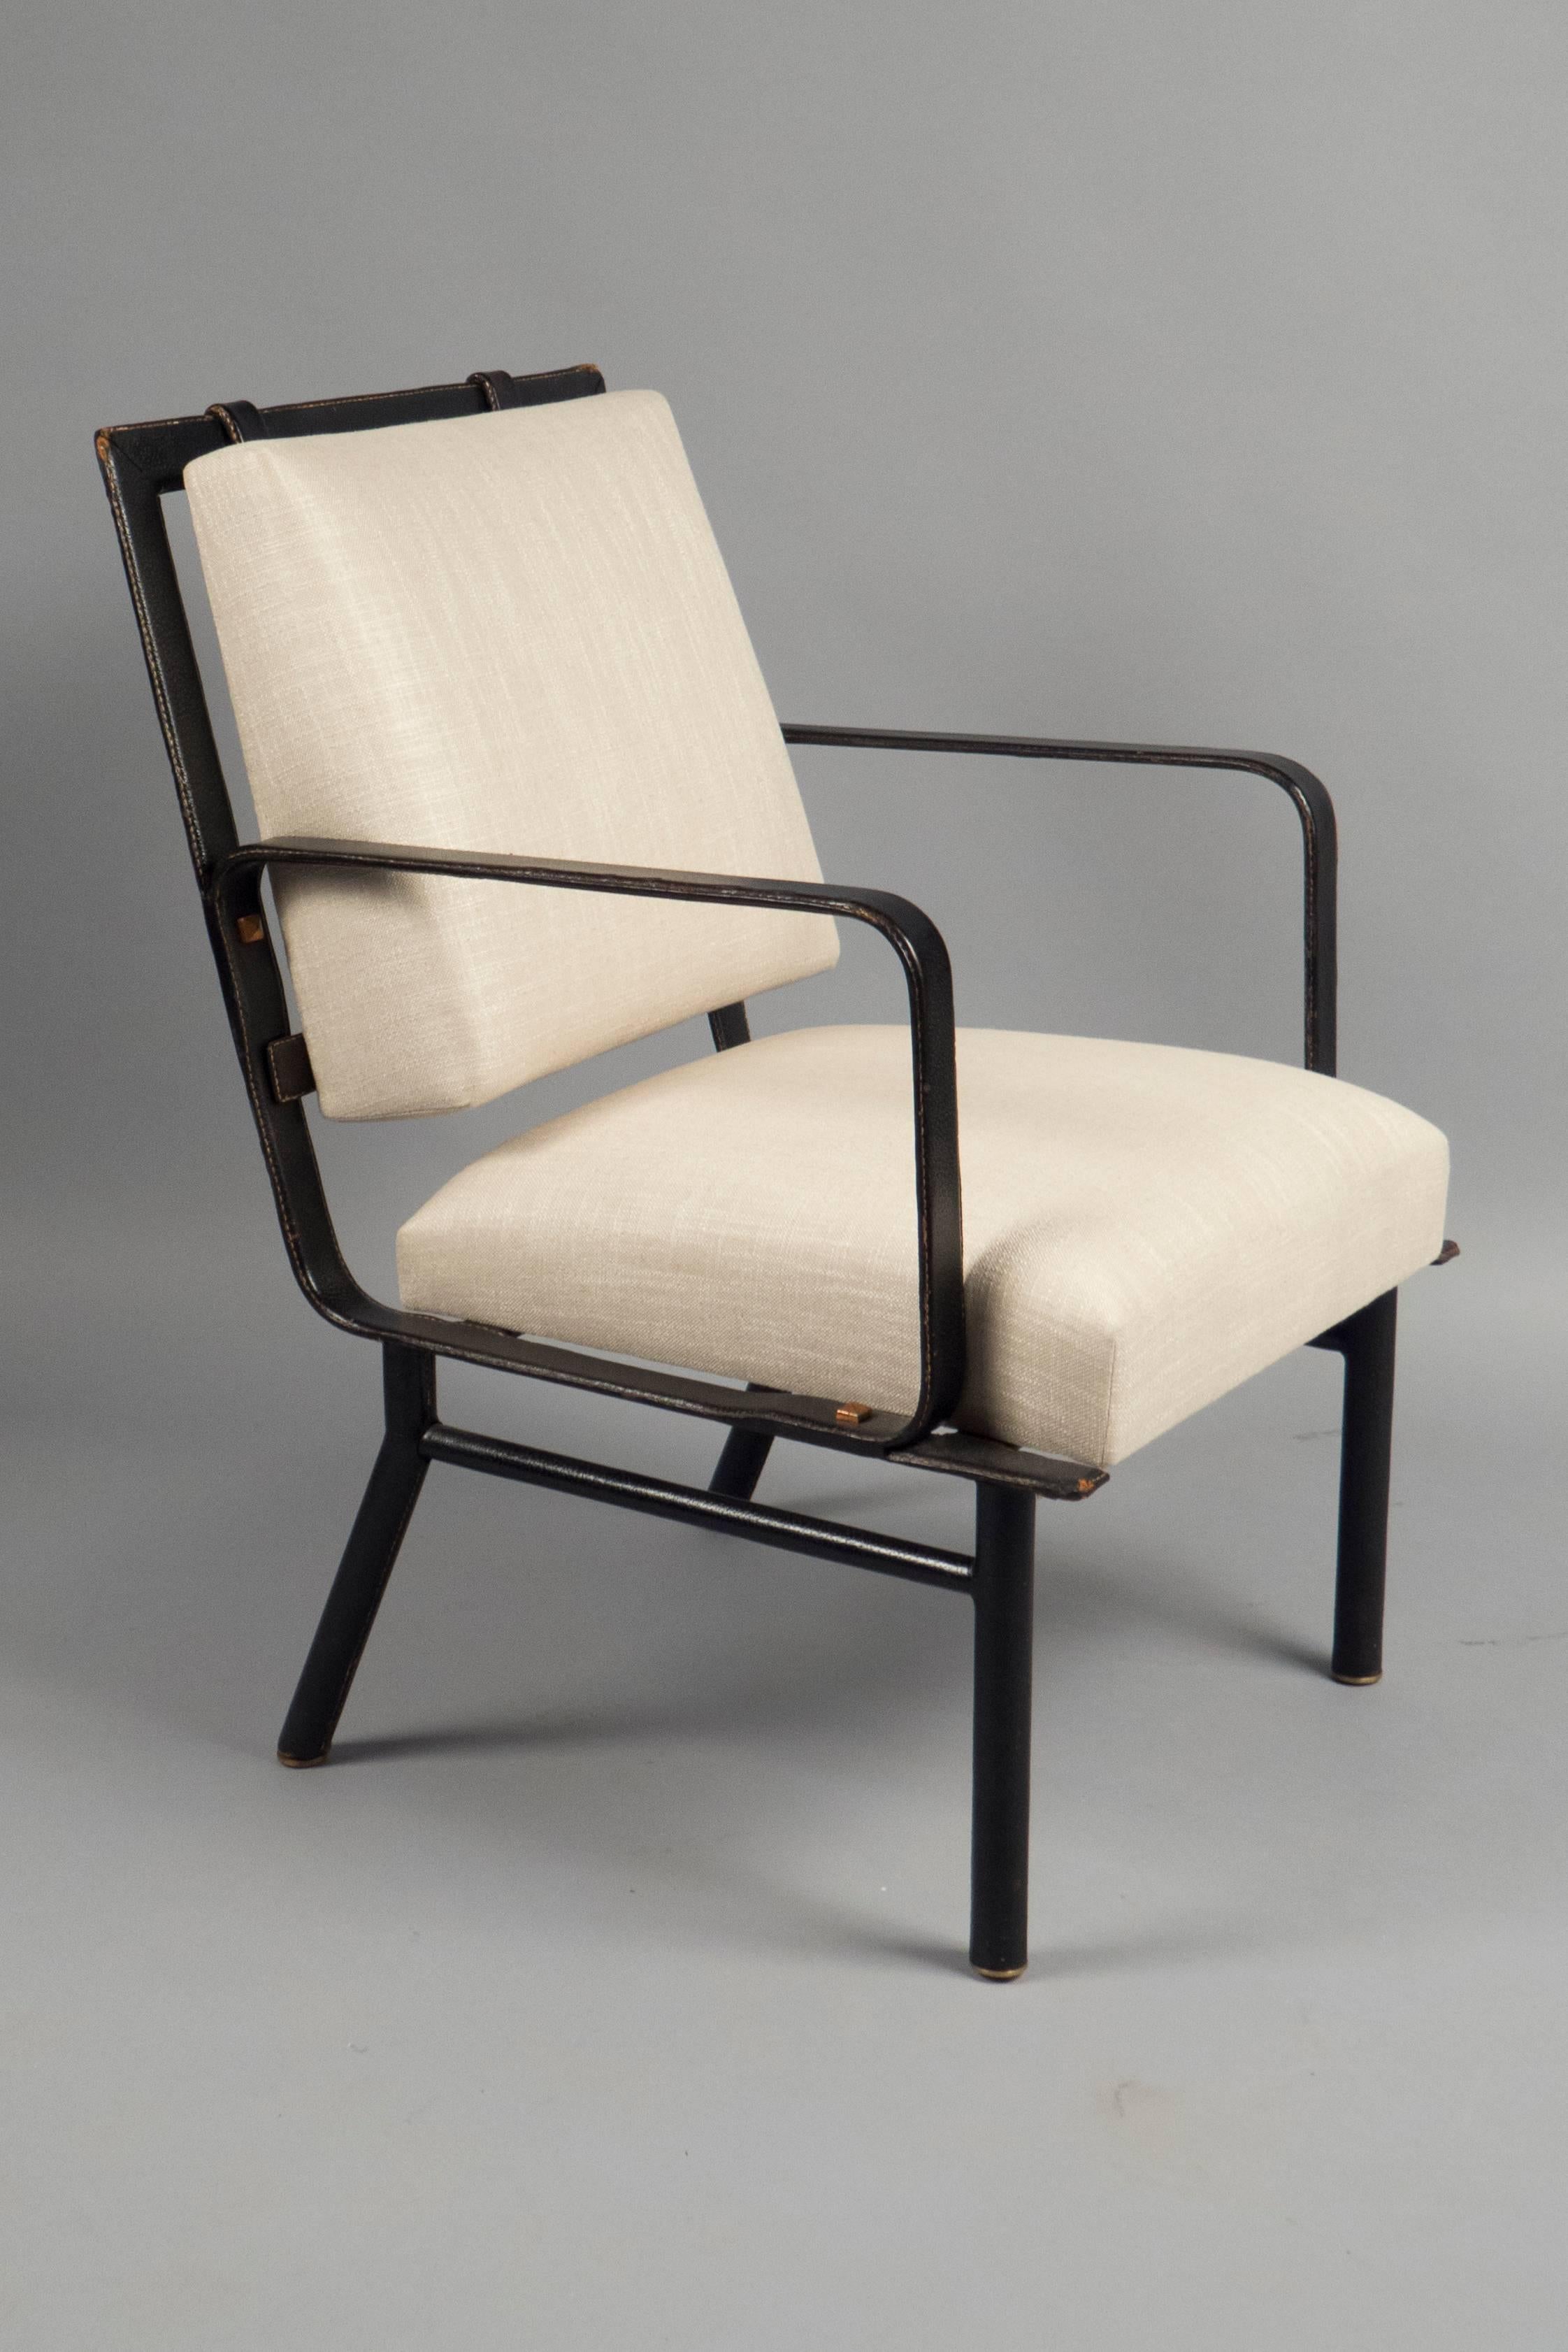 Tubular steel frames sleeved in saddle stitched black leather throughout, the seats and backs are newly upholstered.

Measures: Height 36”, width 23”, depth 25 1/2”.
Seat height 18”.